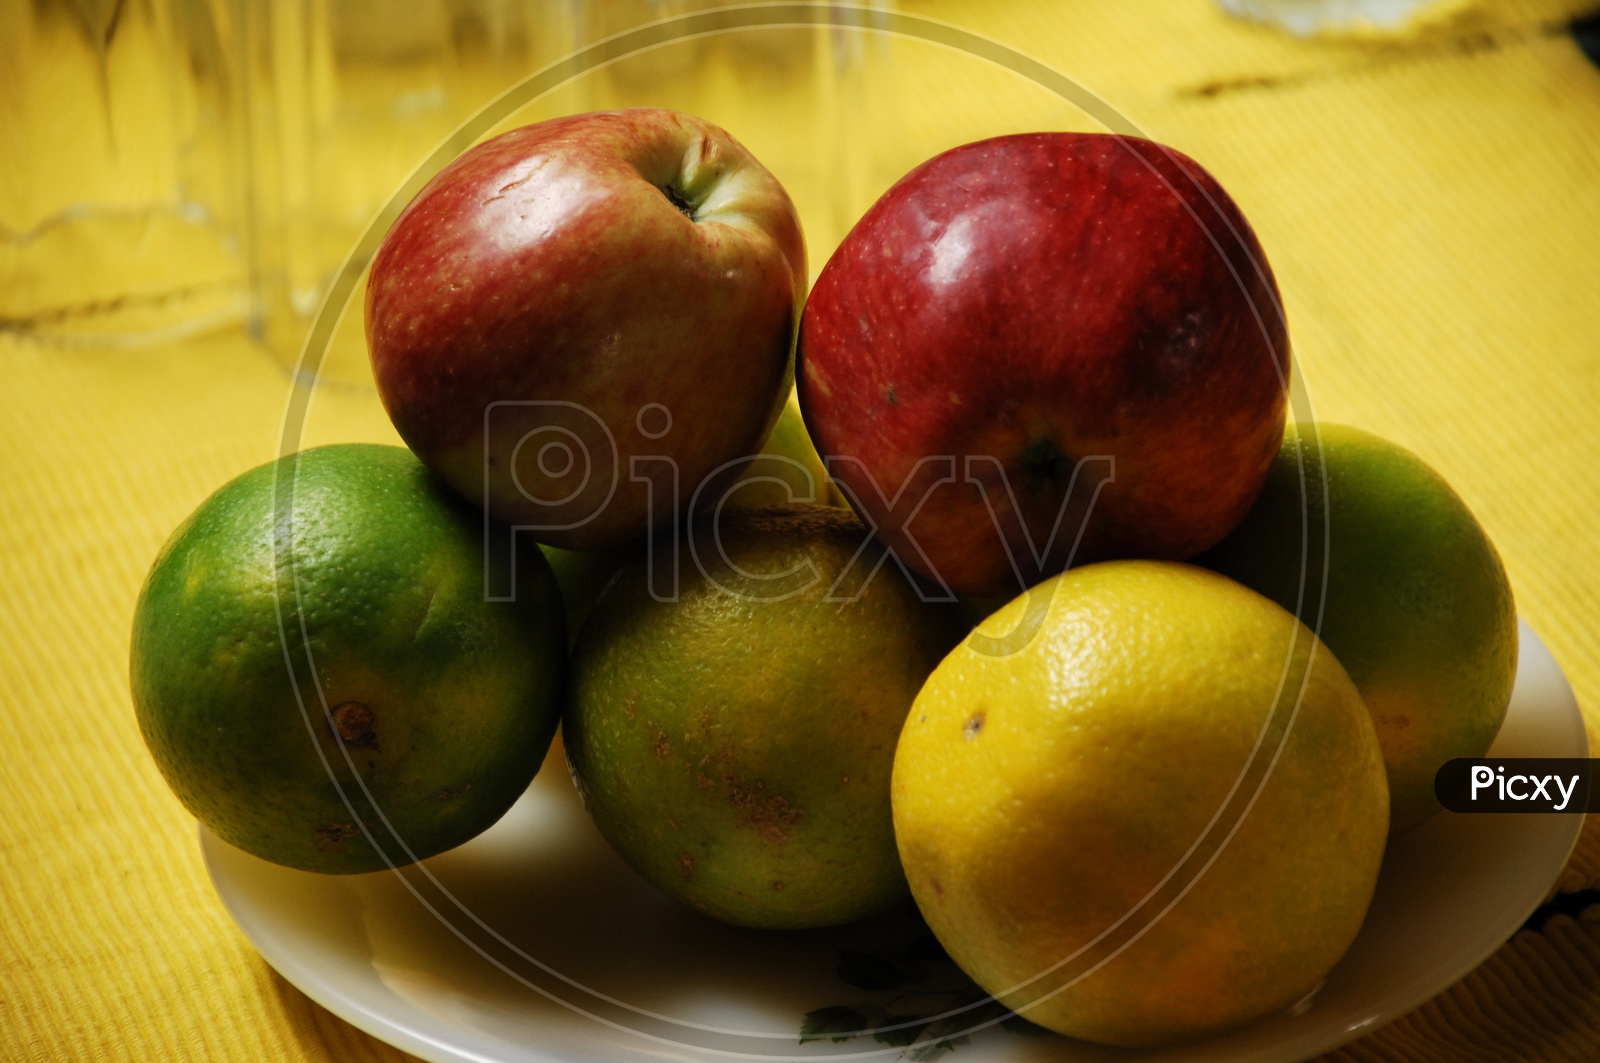 Photograph of fruits in a plate with yellow background